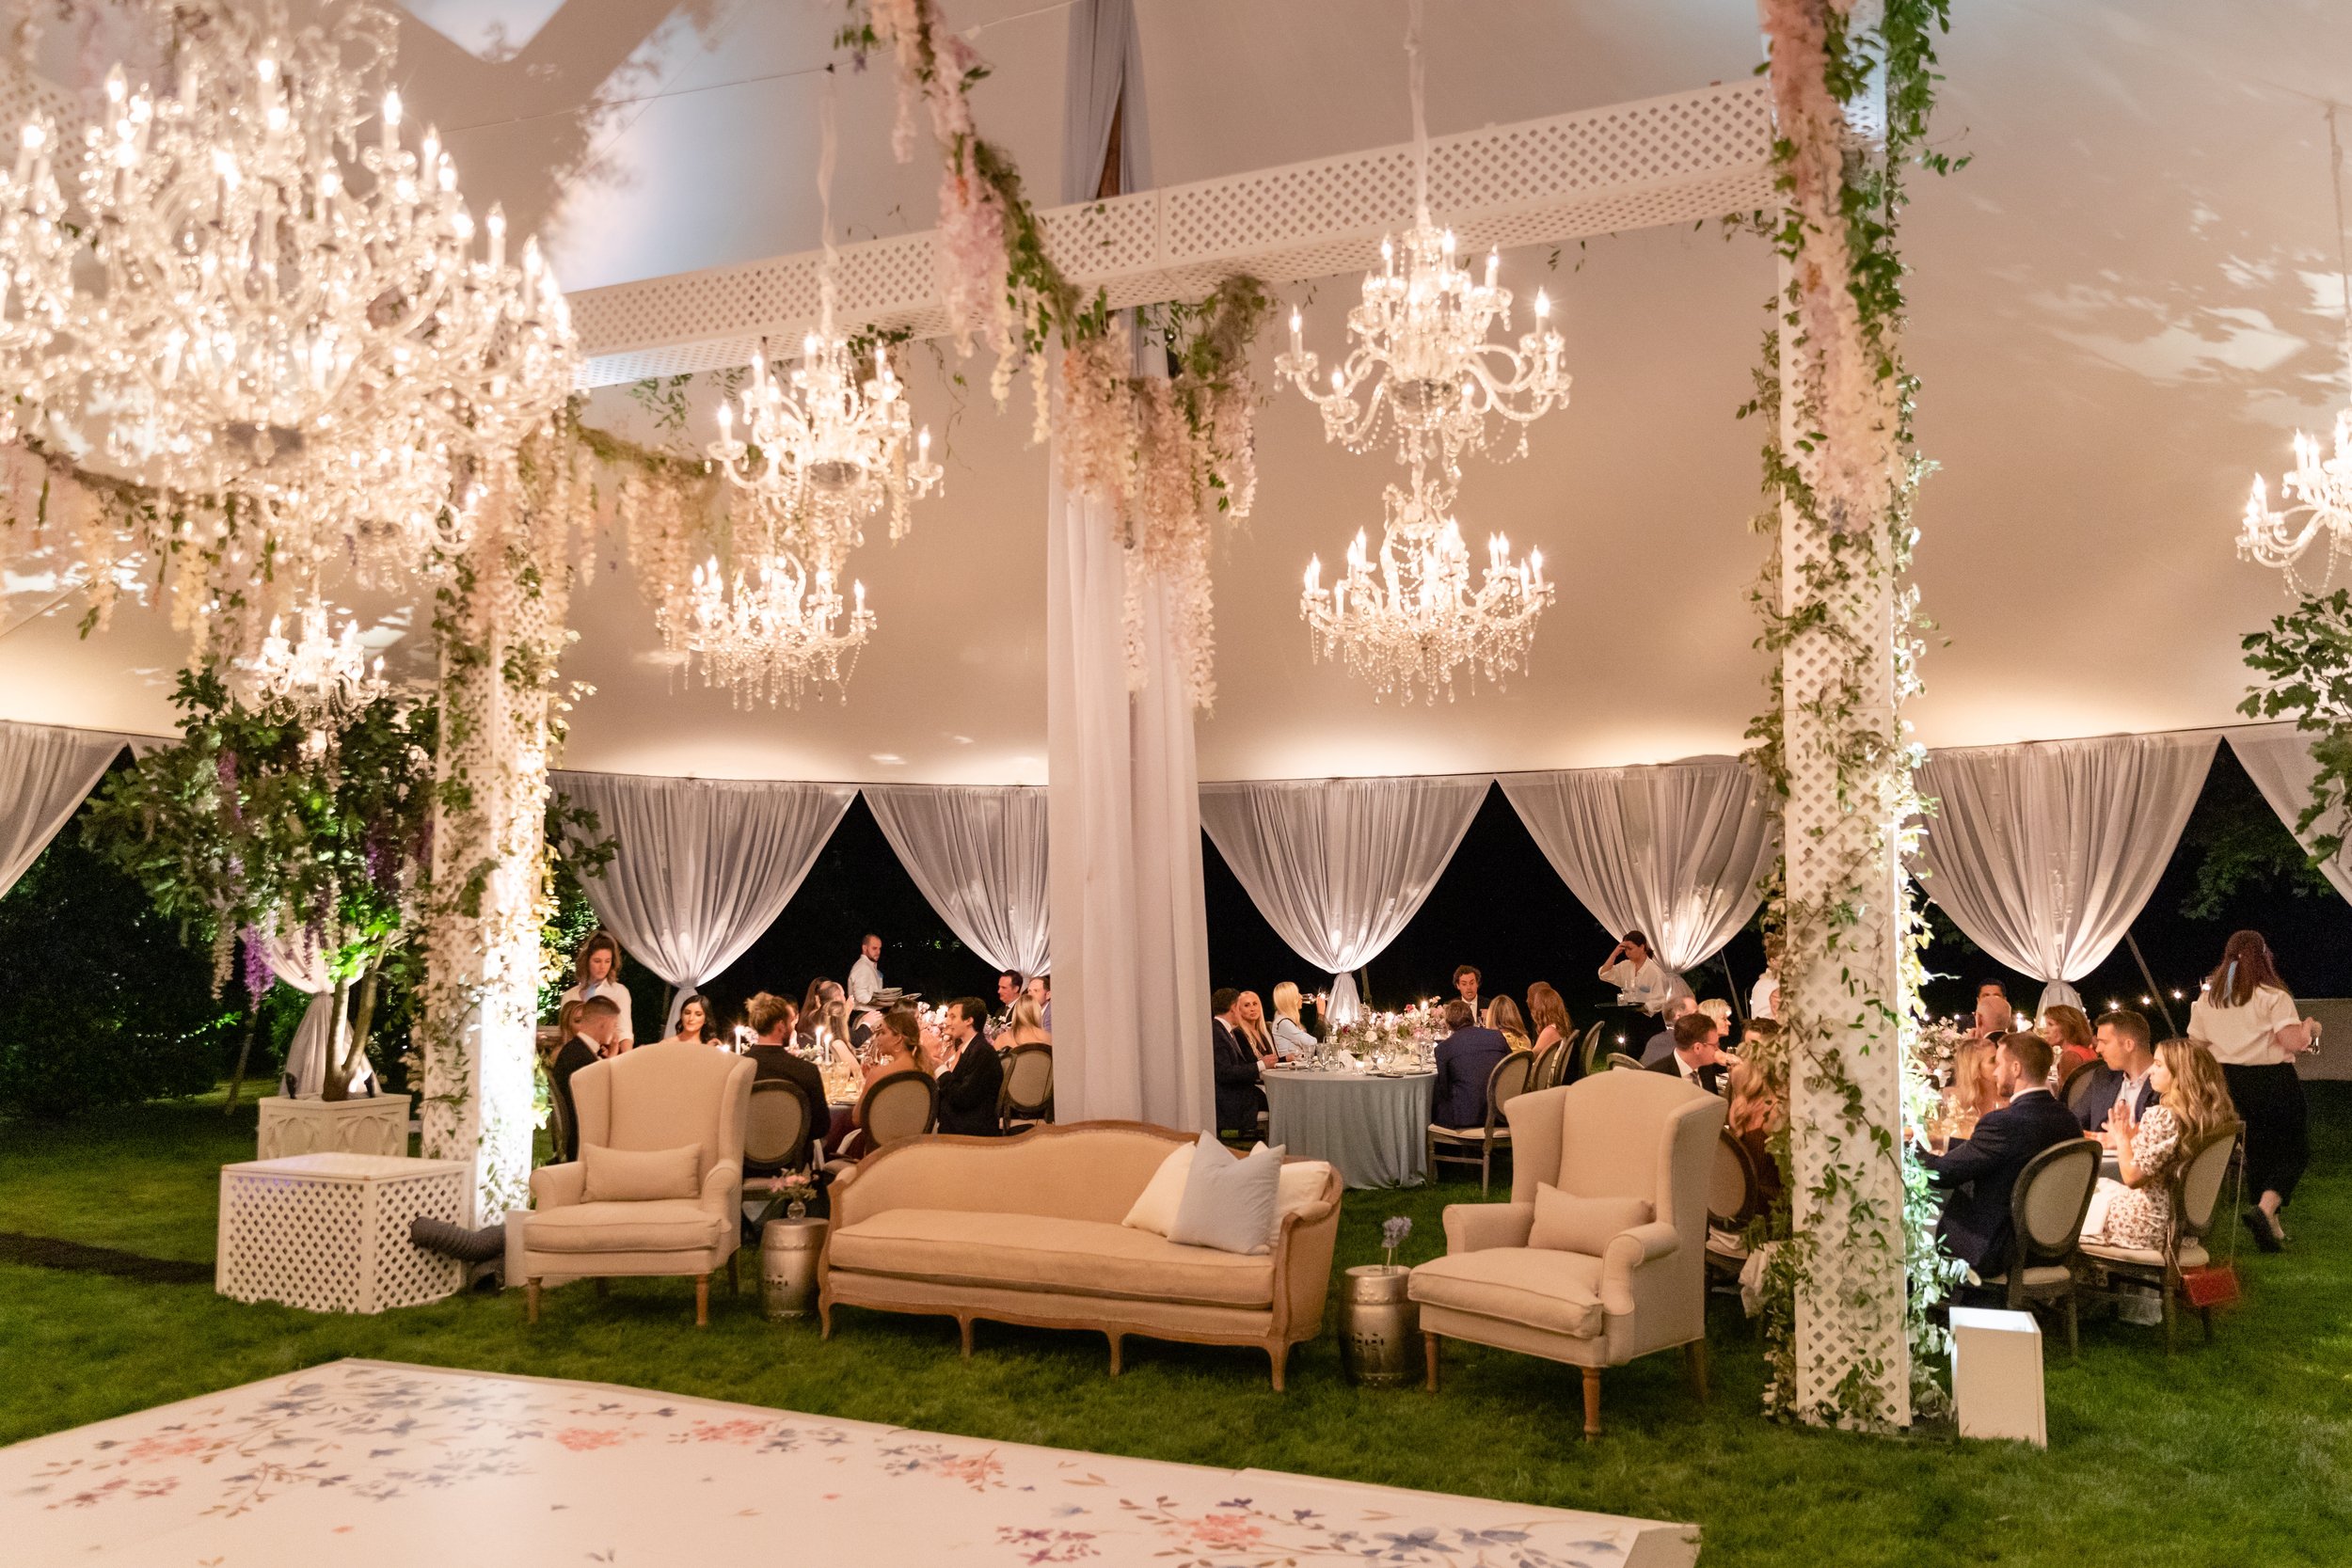 Growing, fresh floral installations and chandeliers with blush garden roses, lavender delphinium, wisteria, globe allium, and vines and greenery for a tented Bridgerton inspired engagement party at a private home in Nashville, TN.